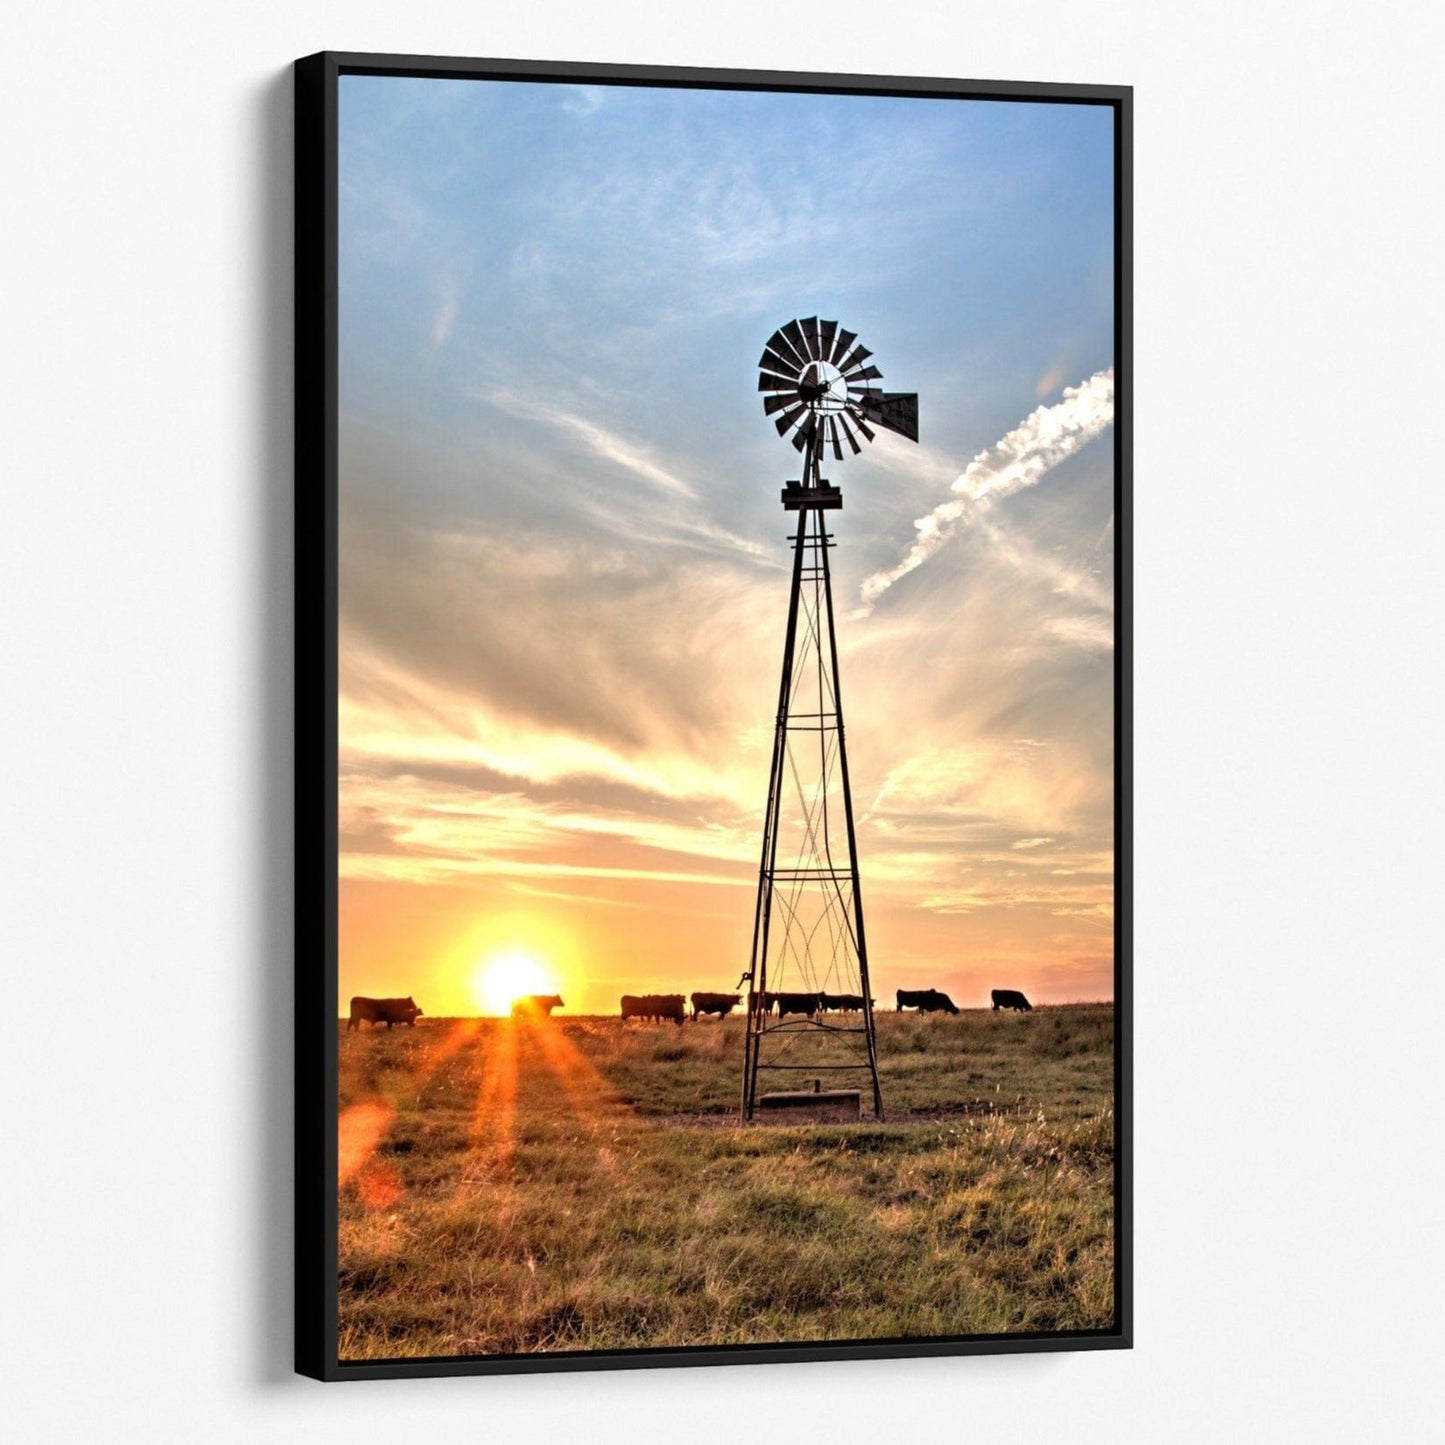 Rustic Old Windmill and Black Angus Cows Wall Art Canvas-Black Frame / 12 x 18 Inches Wall Art Teri James Photography